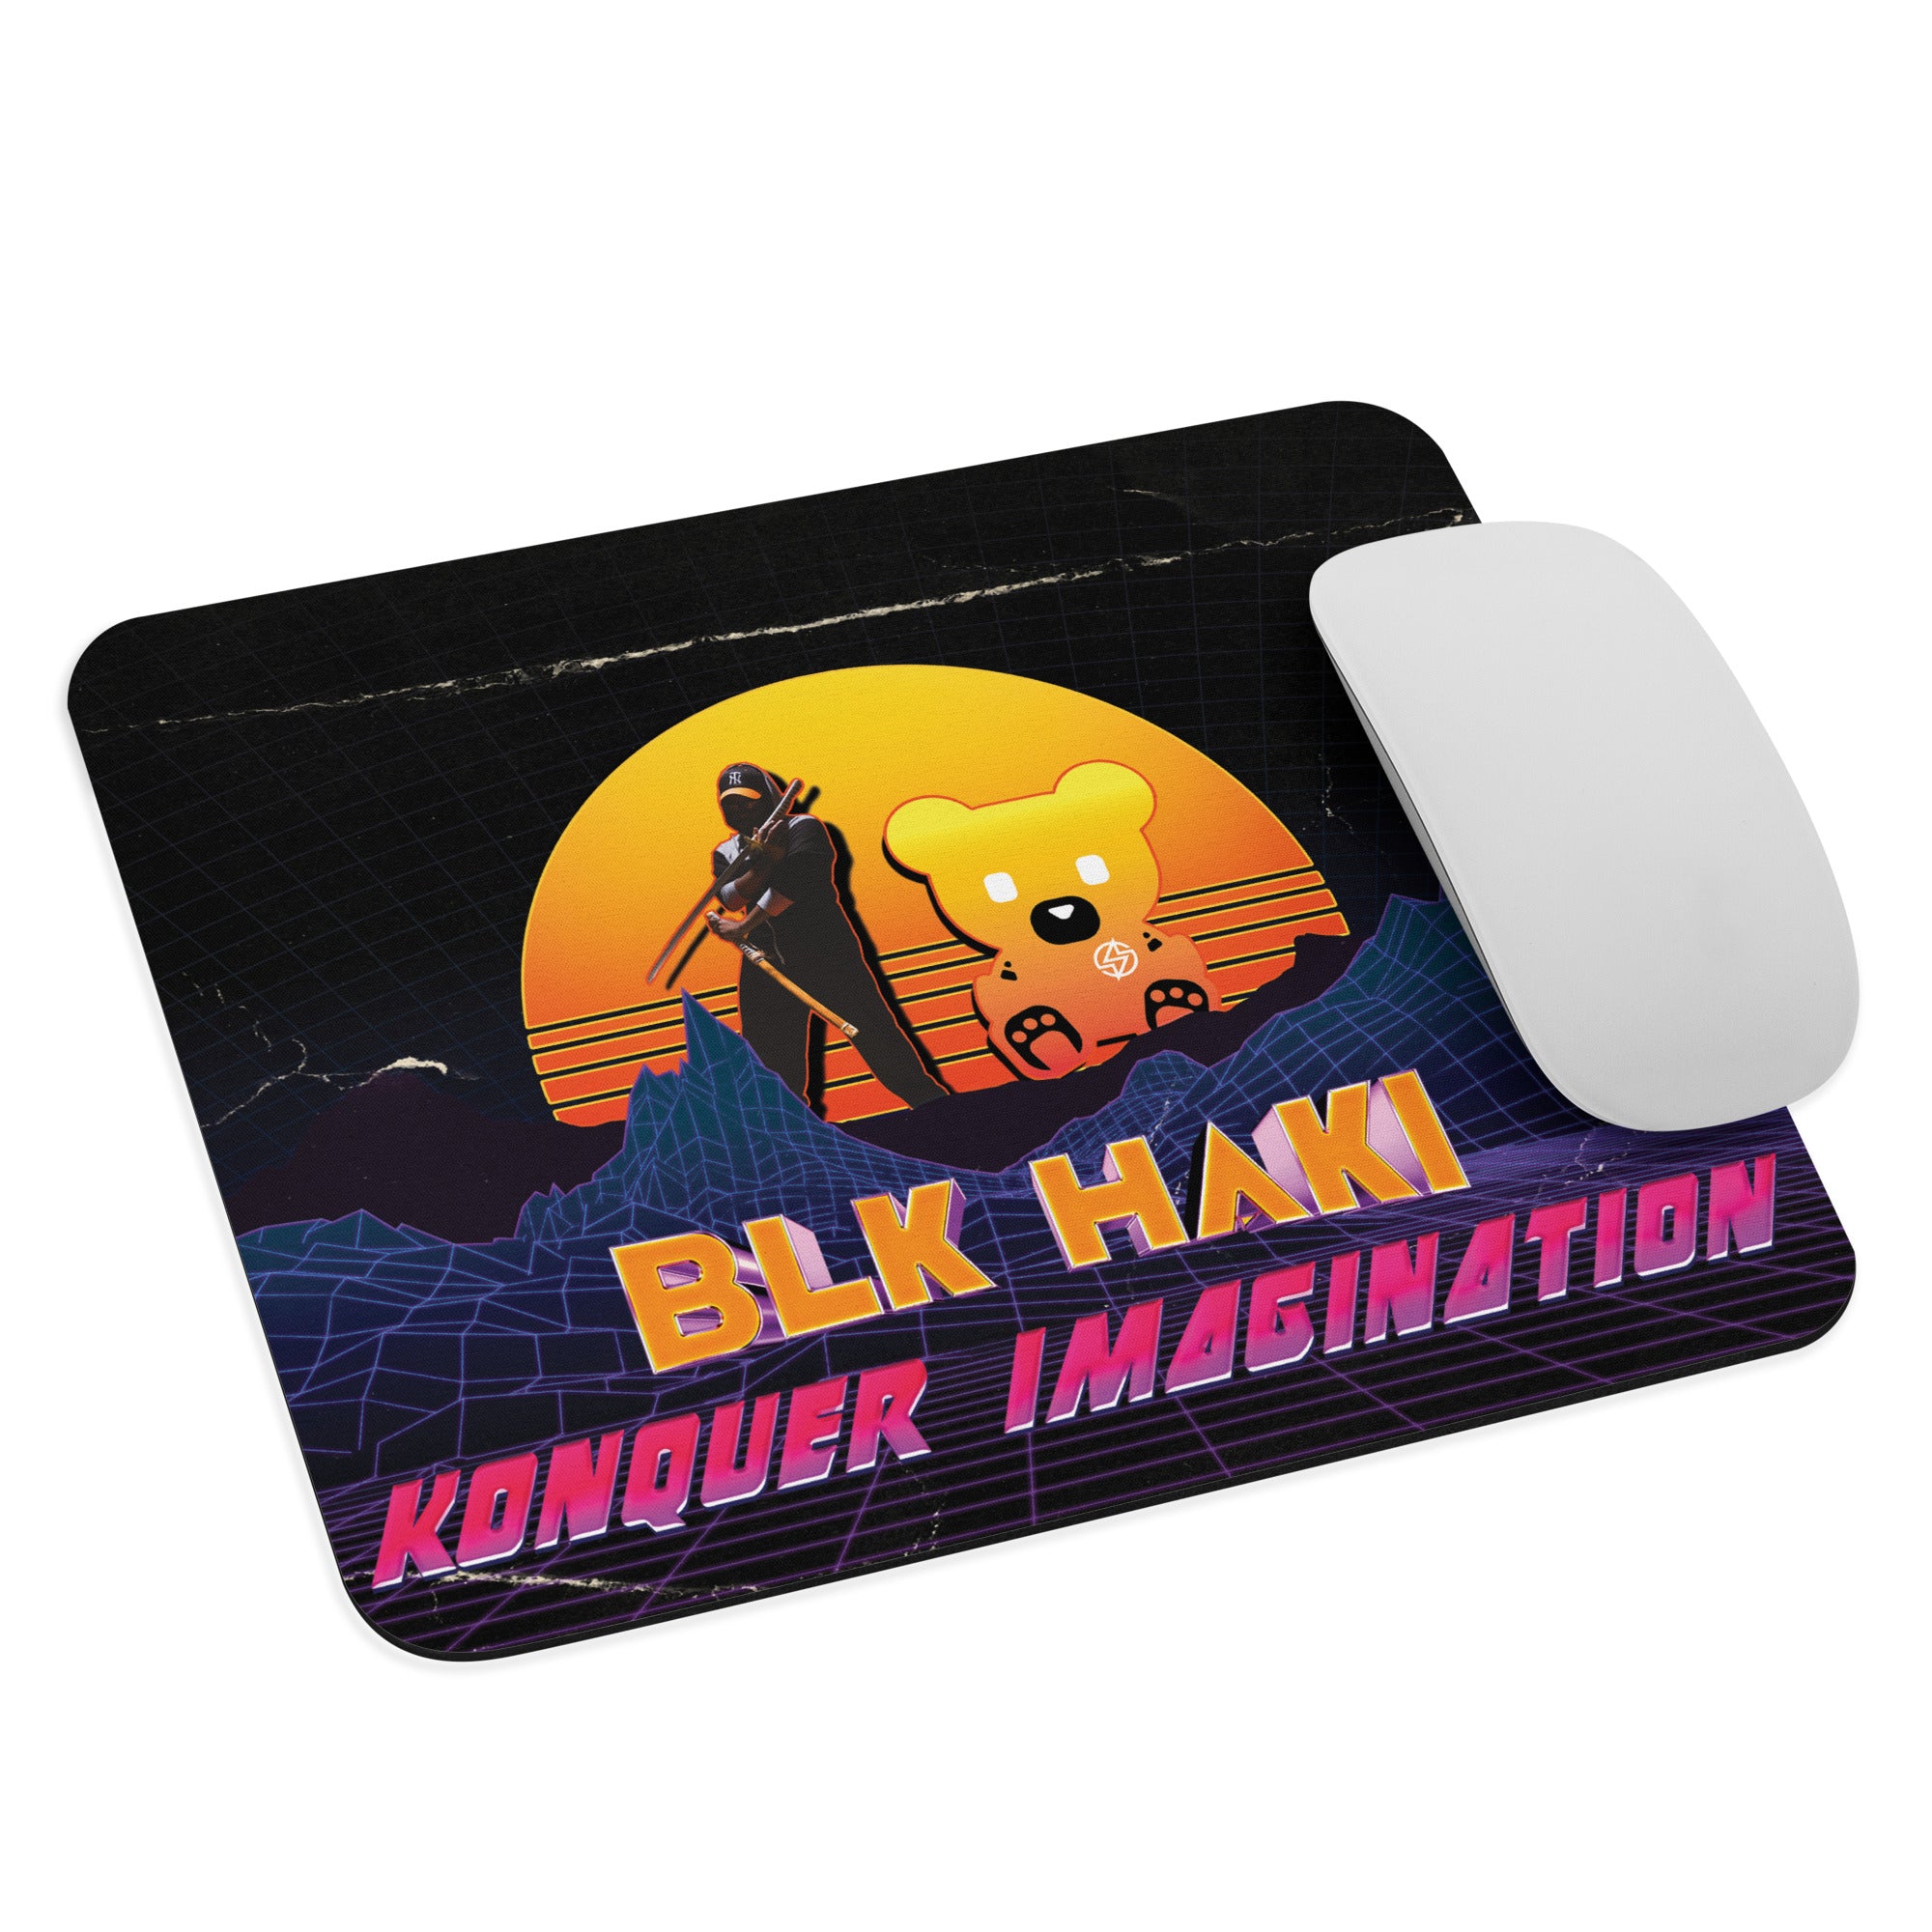 Synthwave Konqueror Gaming Mouse Pad